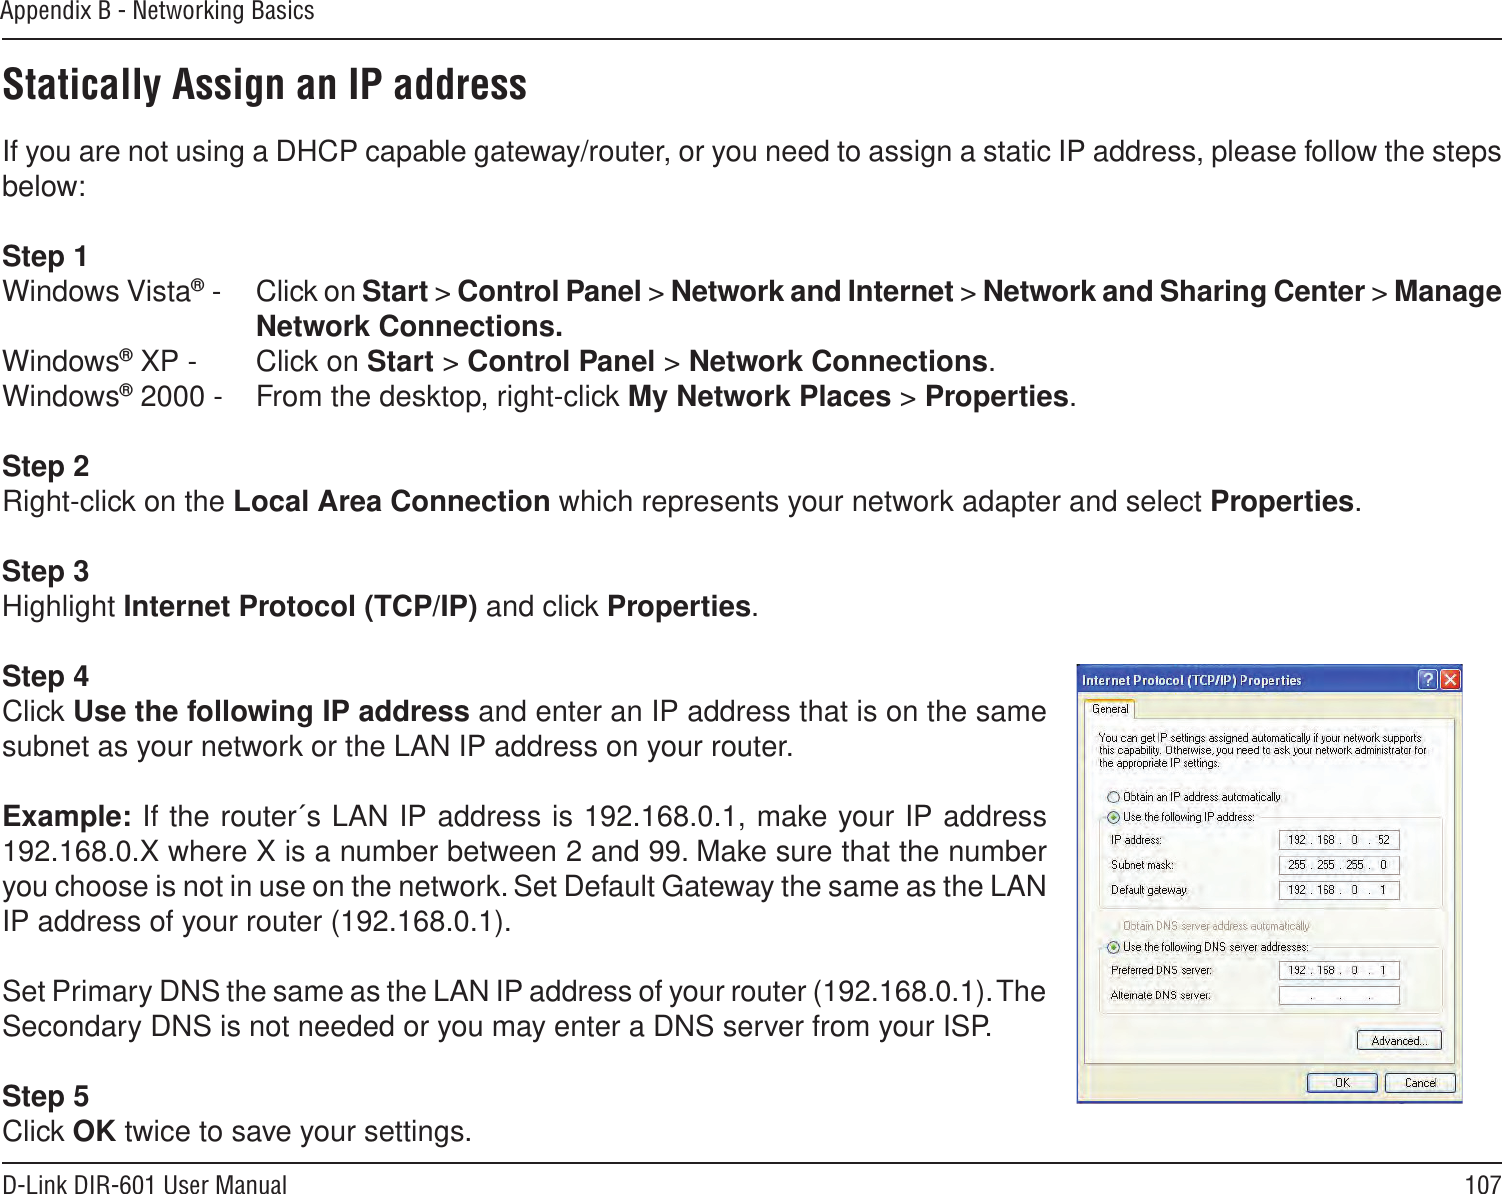 107D-Link DIR-601 User ManualAppendix B - Networking BasicsStatically Assign an IP addressIf you are not using a DHCP capable gateway/router, or you need to assign a static IP address, please follow the steps below:Step 1Windows Vista® -  Click on Start &gt; Control Panel &gt; Network and Internet &gt; Network and Sharing Center &gt; Manage Network Connections.Windows® XP -  Click on Start &gt; Control Panel &gt; Network Connections.Windows® 2000 -  From the desktop, right-click My Network Places &gt; Properties.Step 2Right-click on the Local Area Connection which represents your network adapter and select Properties.Step 3Highlight Internet Protocol (TCP/IP) and click Properties.Step 4Click Use the following IP address and enter an IP address that is on the same subnet as your network or the LAN IP address on your router. Example: If the router´s LAN IP address is 192.168.0.1, make your IP address 192.168.0.X where X is a number between 2 and 99. Make sure that the number you choose is not in use on the network. Set Default Gateway the same as the LAN IP address of your router (192.168.0.1). Set Primary DNS the same as the LAN IP address of your router (192.168.0.1). The Secondary DNS is not needed or you may enter a DNS server from your ISP.Step 5Click OK twice to save your settings.